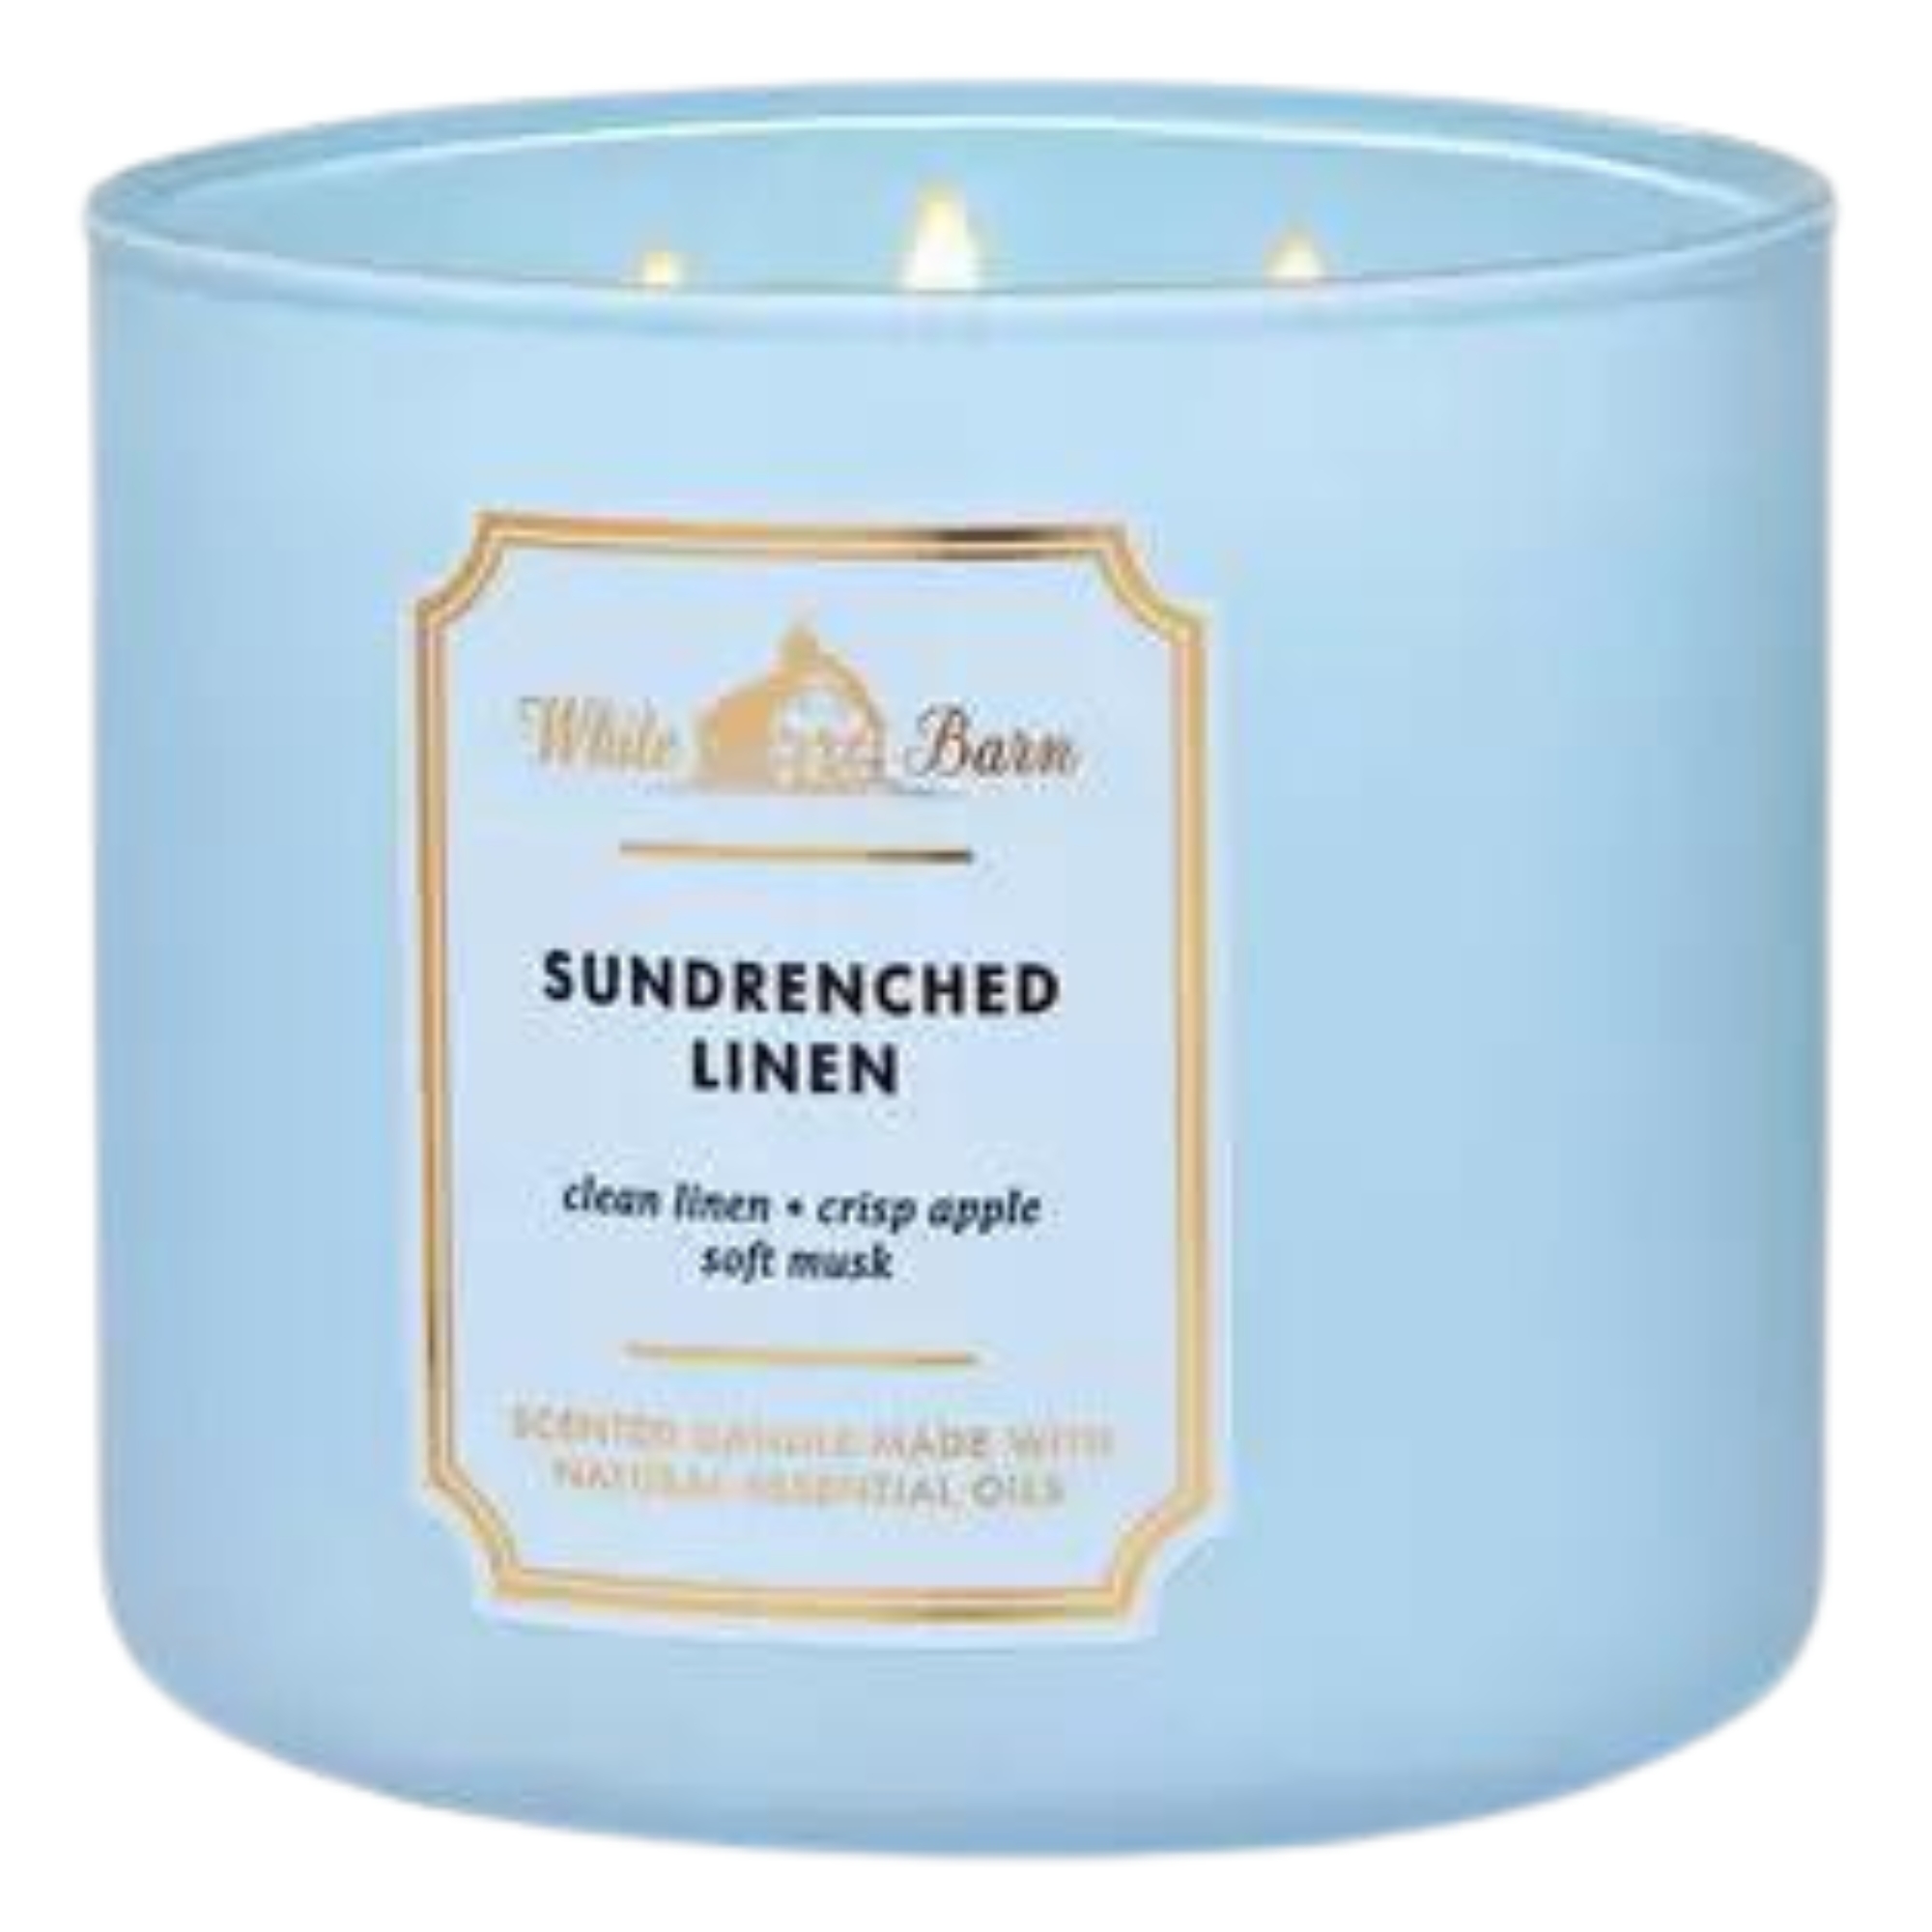 3-Wick White Barn Sundrenched Linen Candle from Bath & Body Works